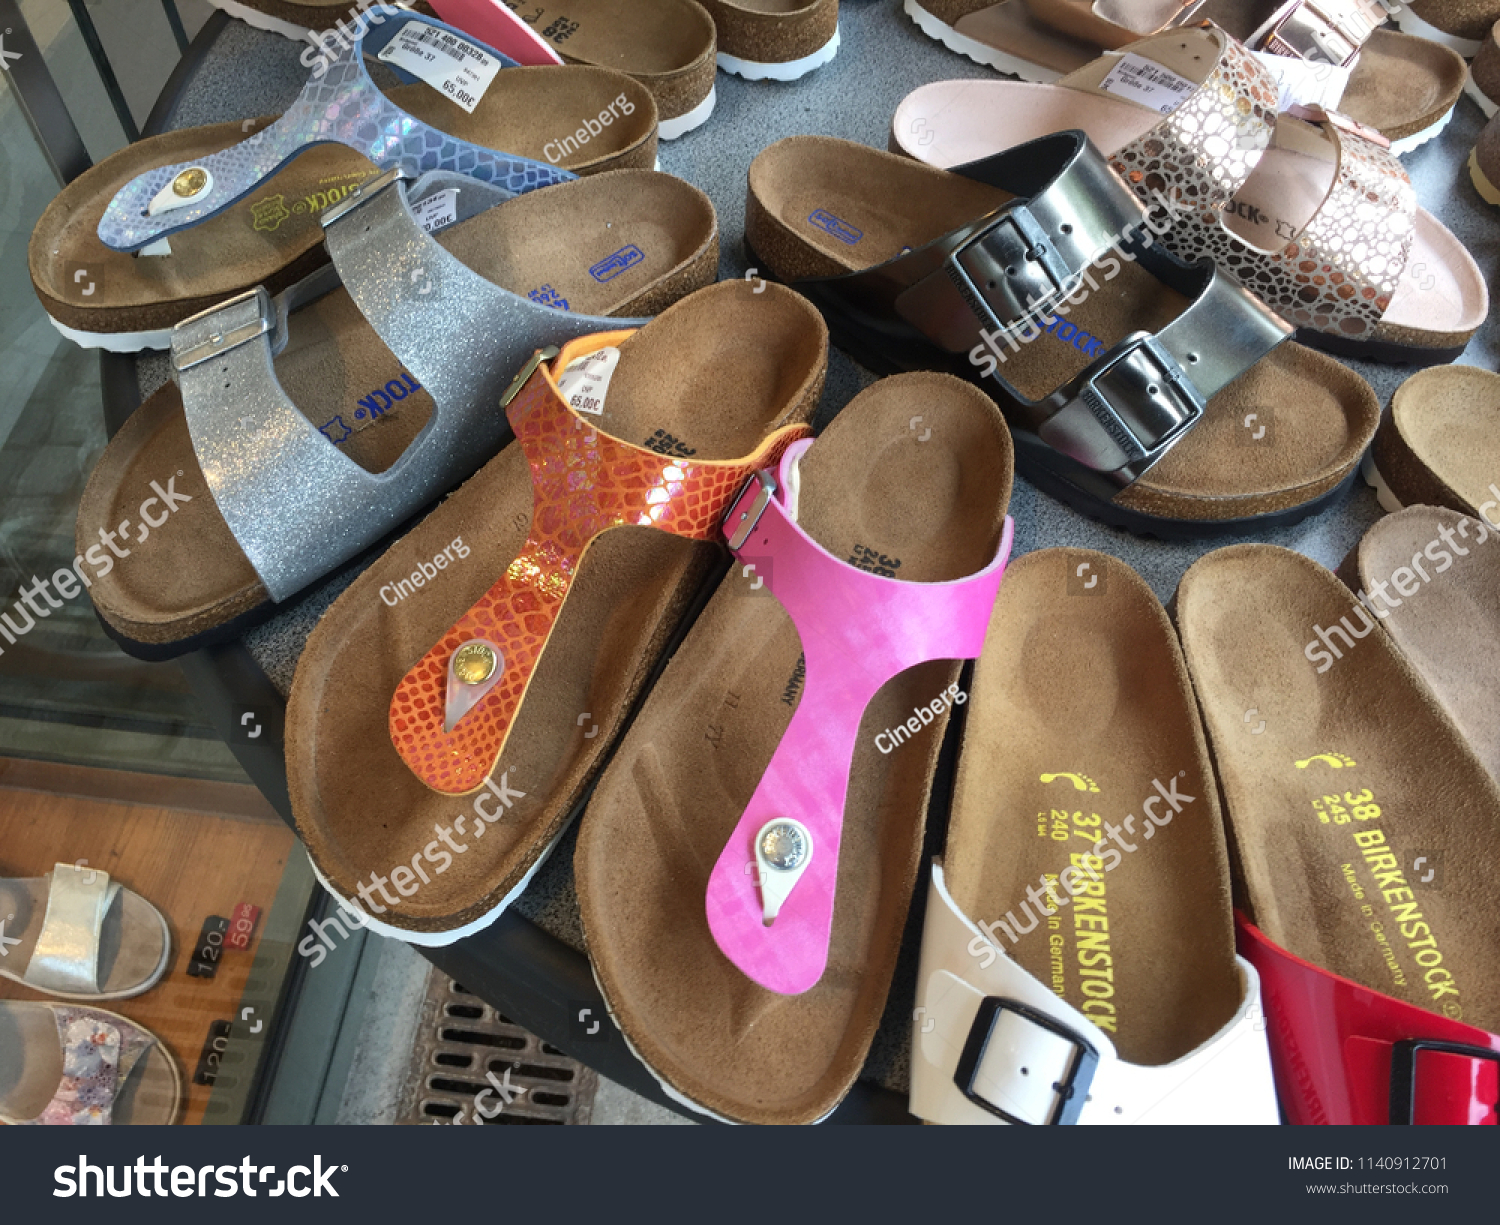 stores that sell birkenstock sandals